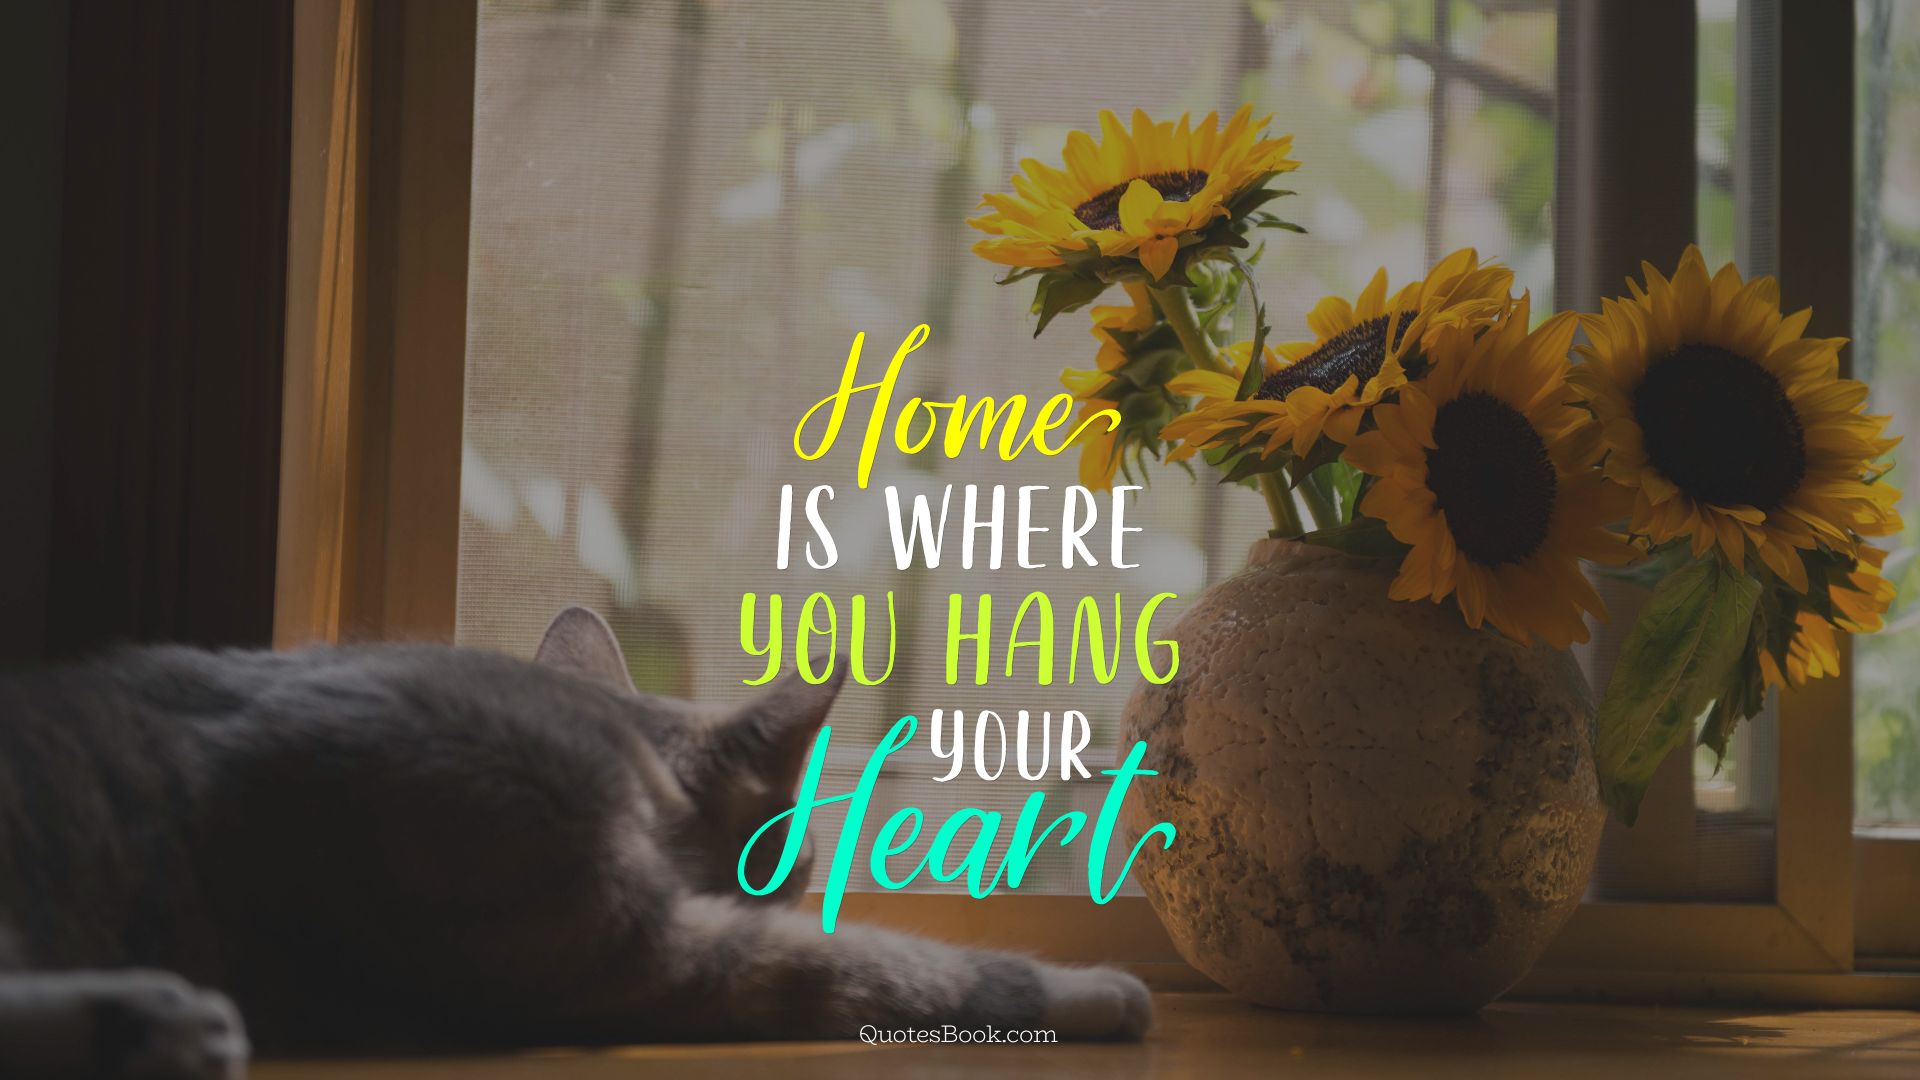 Home Is Where You Hang Your Heart